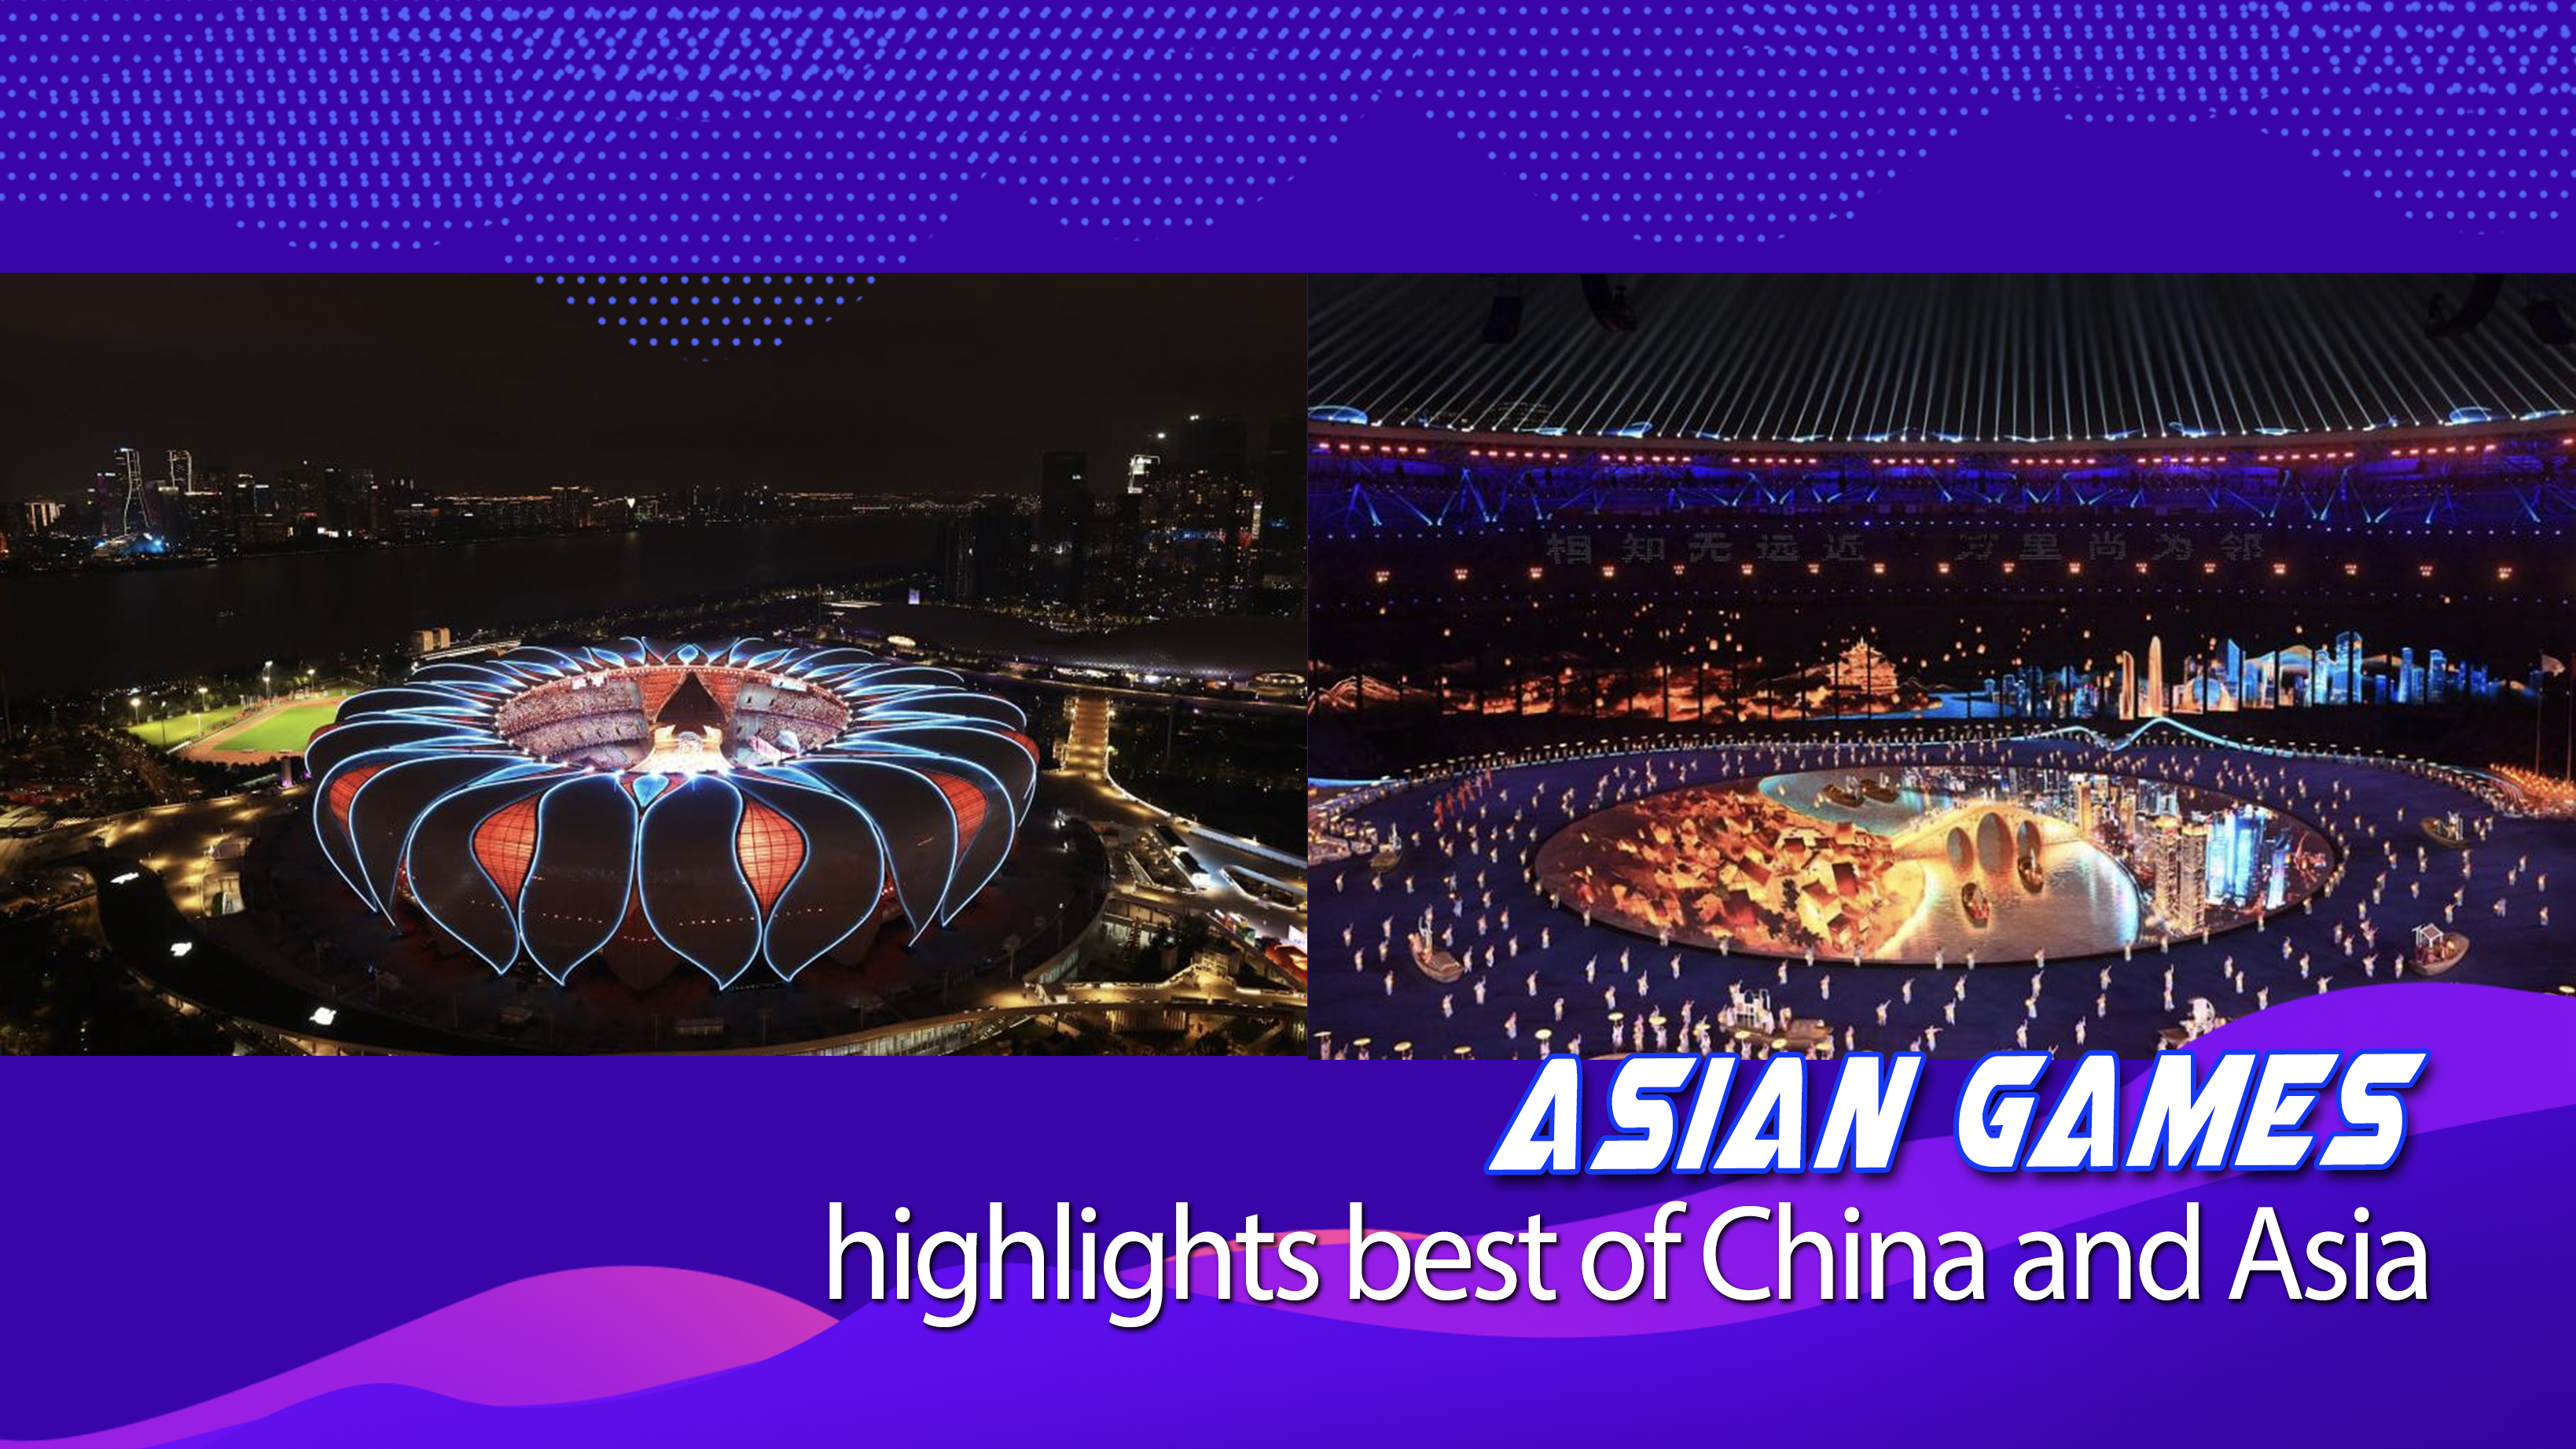 Asian Games highlights best of China and Asia